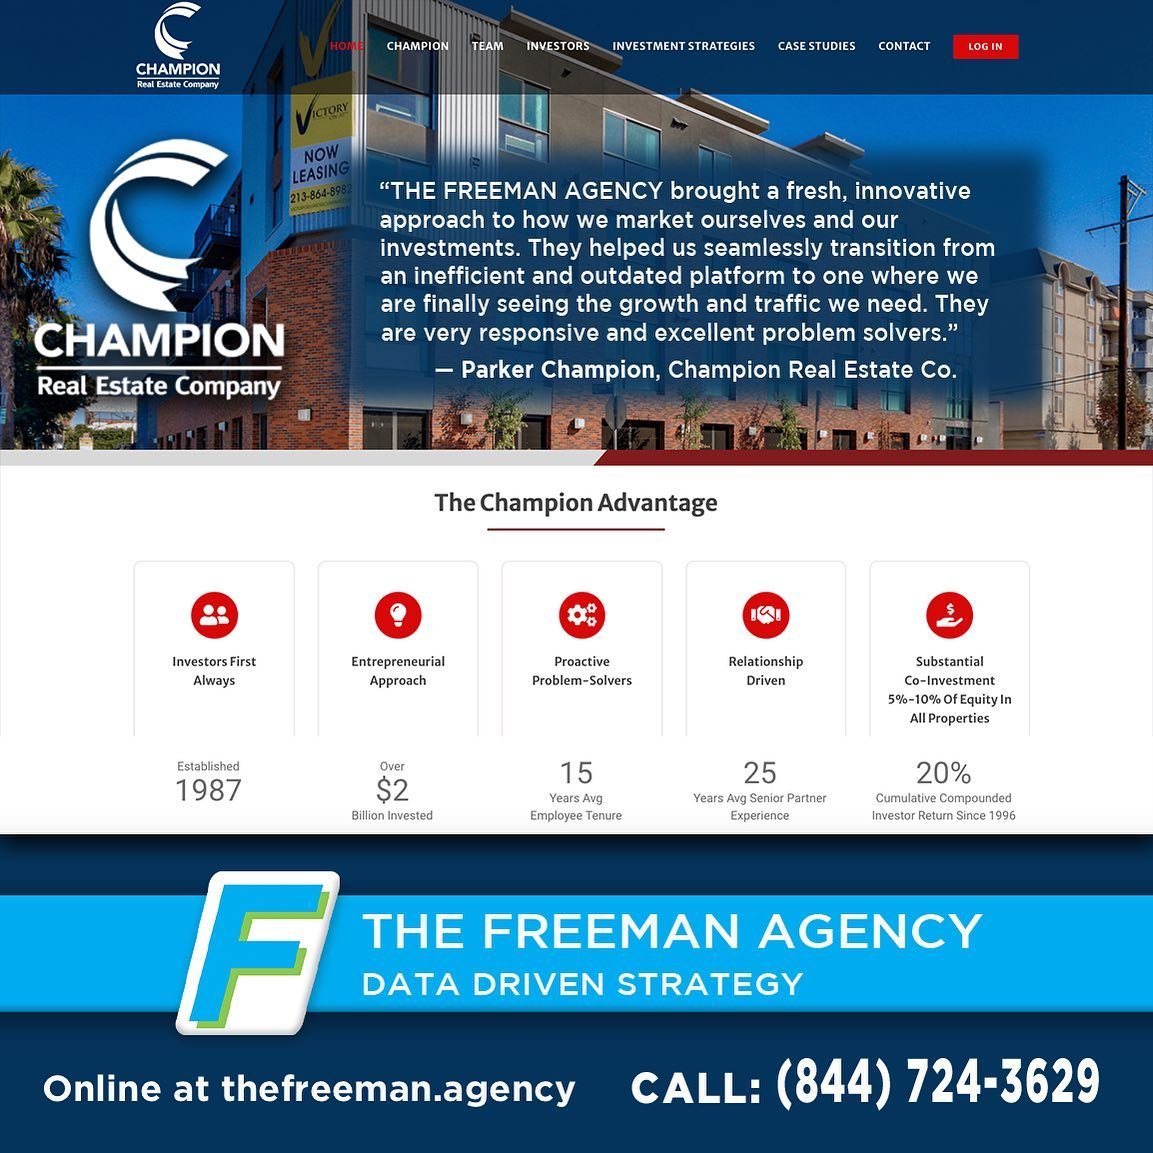 &ldquo;THE FREEMAN AGENCY brought a fresh, innovative approach to how we market ourselves and our investments. They helped us seamlessly transition from an inefficient and outdated platform to one where we are finally seeing the growth and traffic we